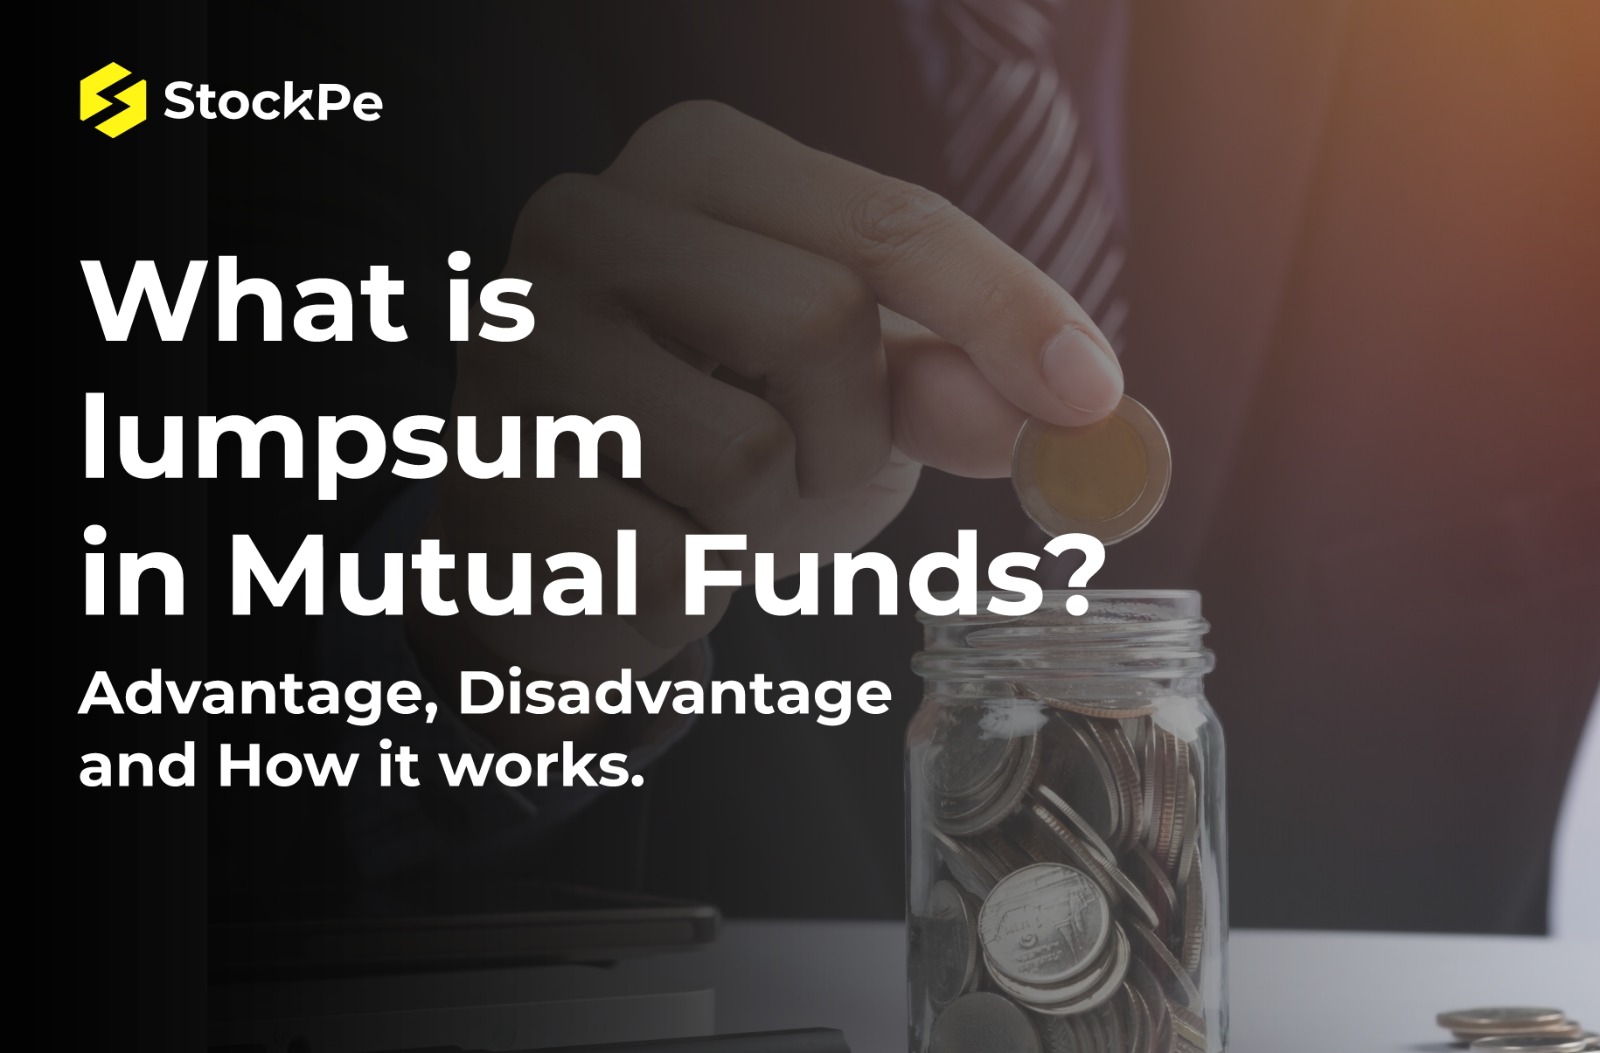 You are currently viewing What is lumpsum in Mutual Funds? Advantage, Disadvantage and How it works.